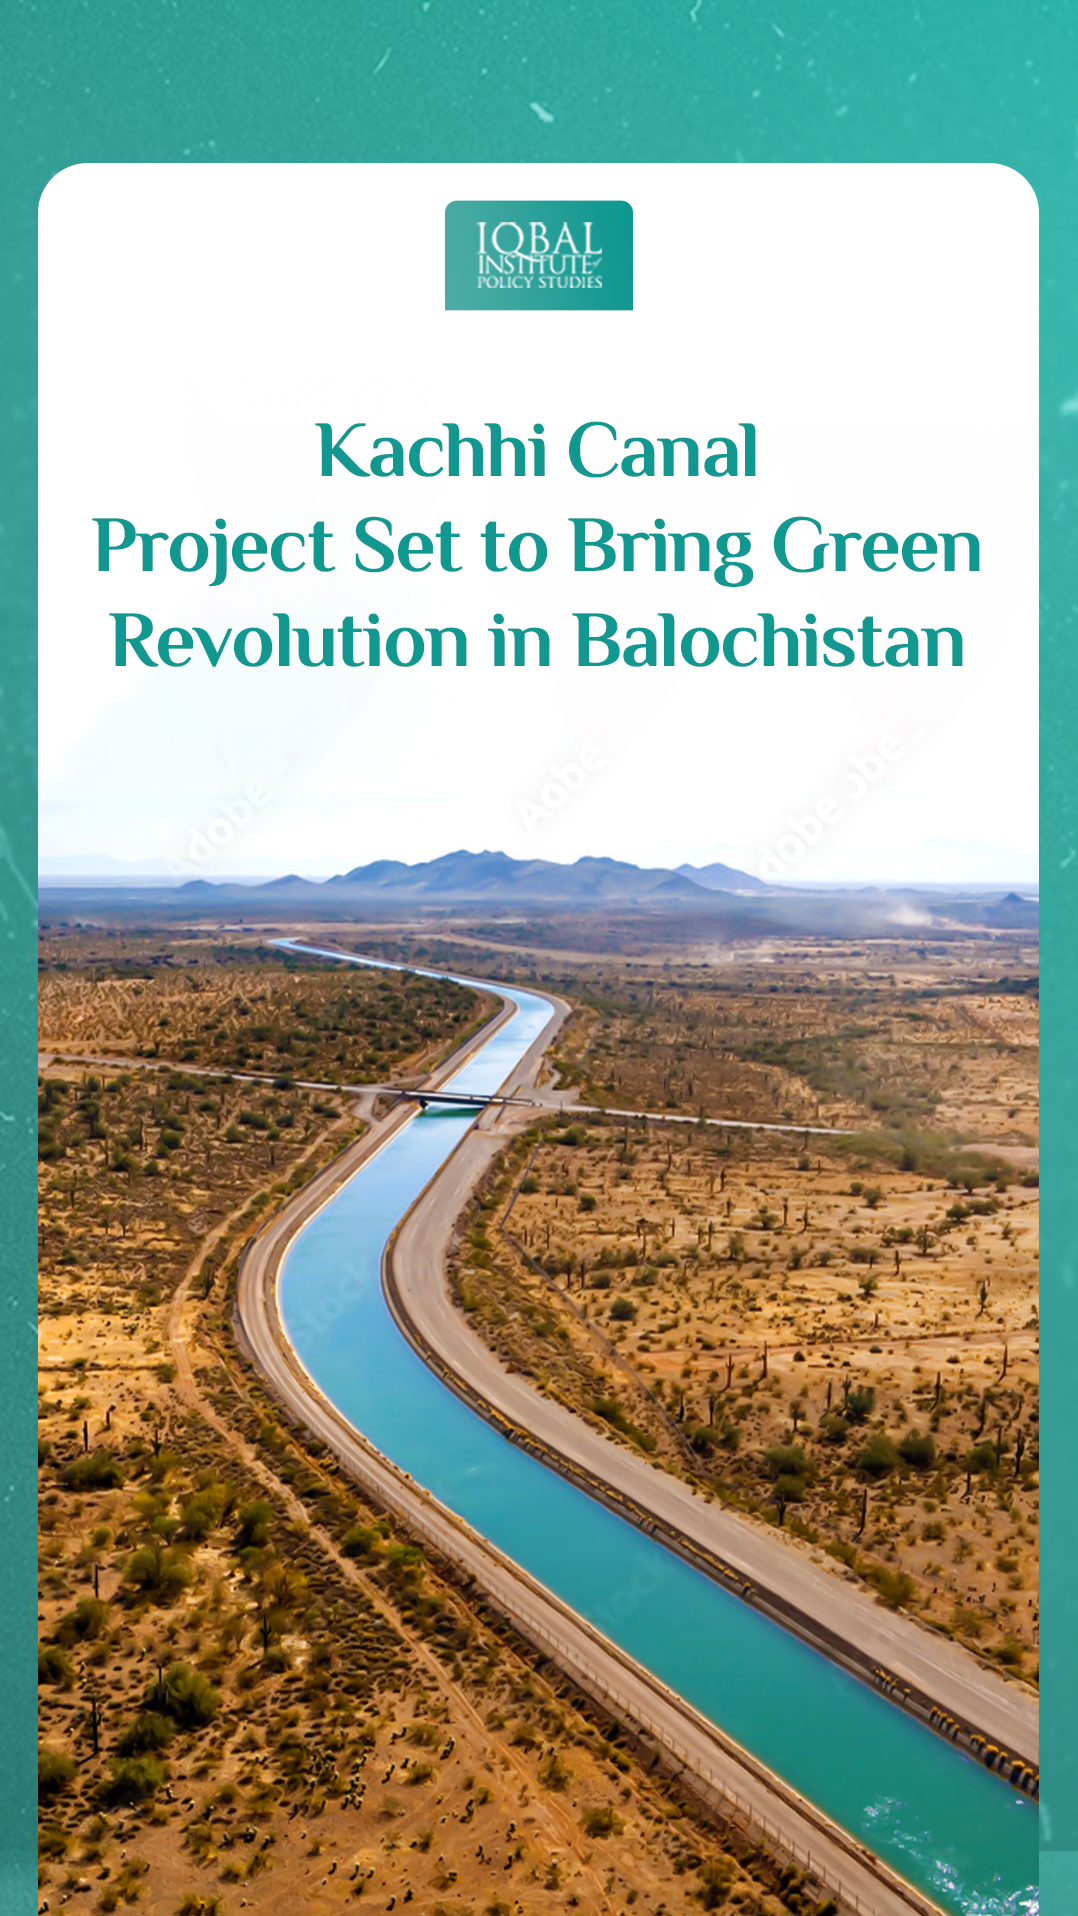 Kachhi Canal Project Set to Bring Green Revolution in Balochistan